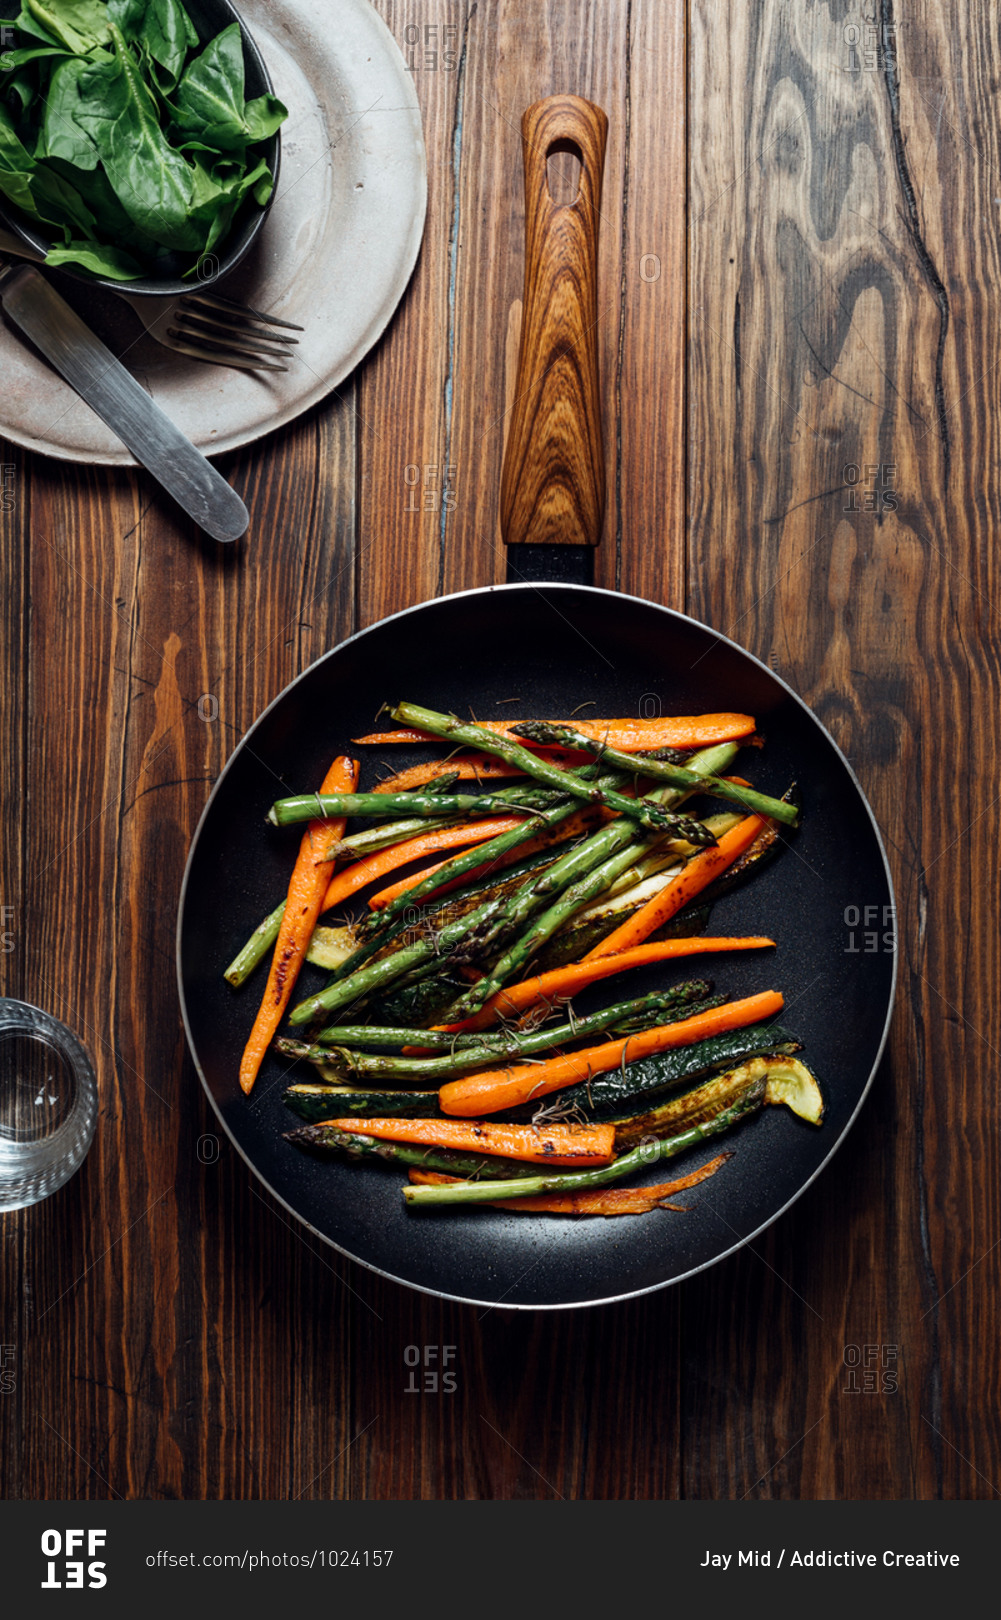 Carrot, asparagus and zucchini sauteed in the pan, on the table ready to eat. Simple and healthy vegan eating concept